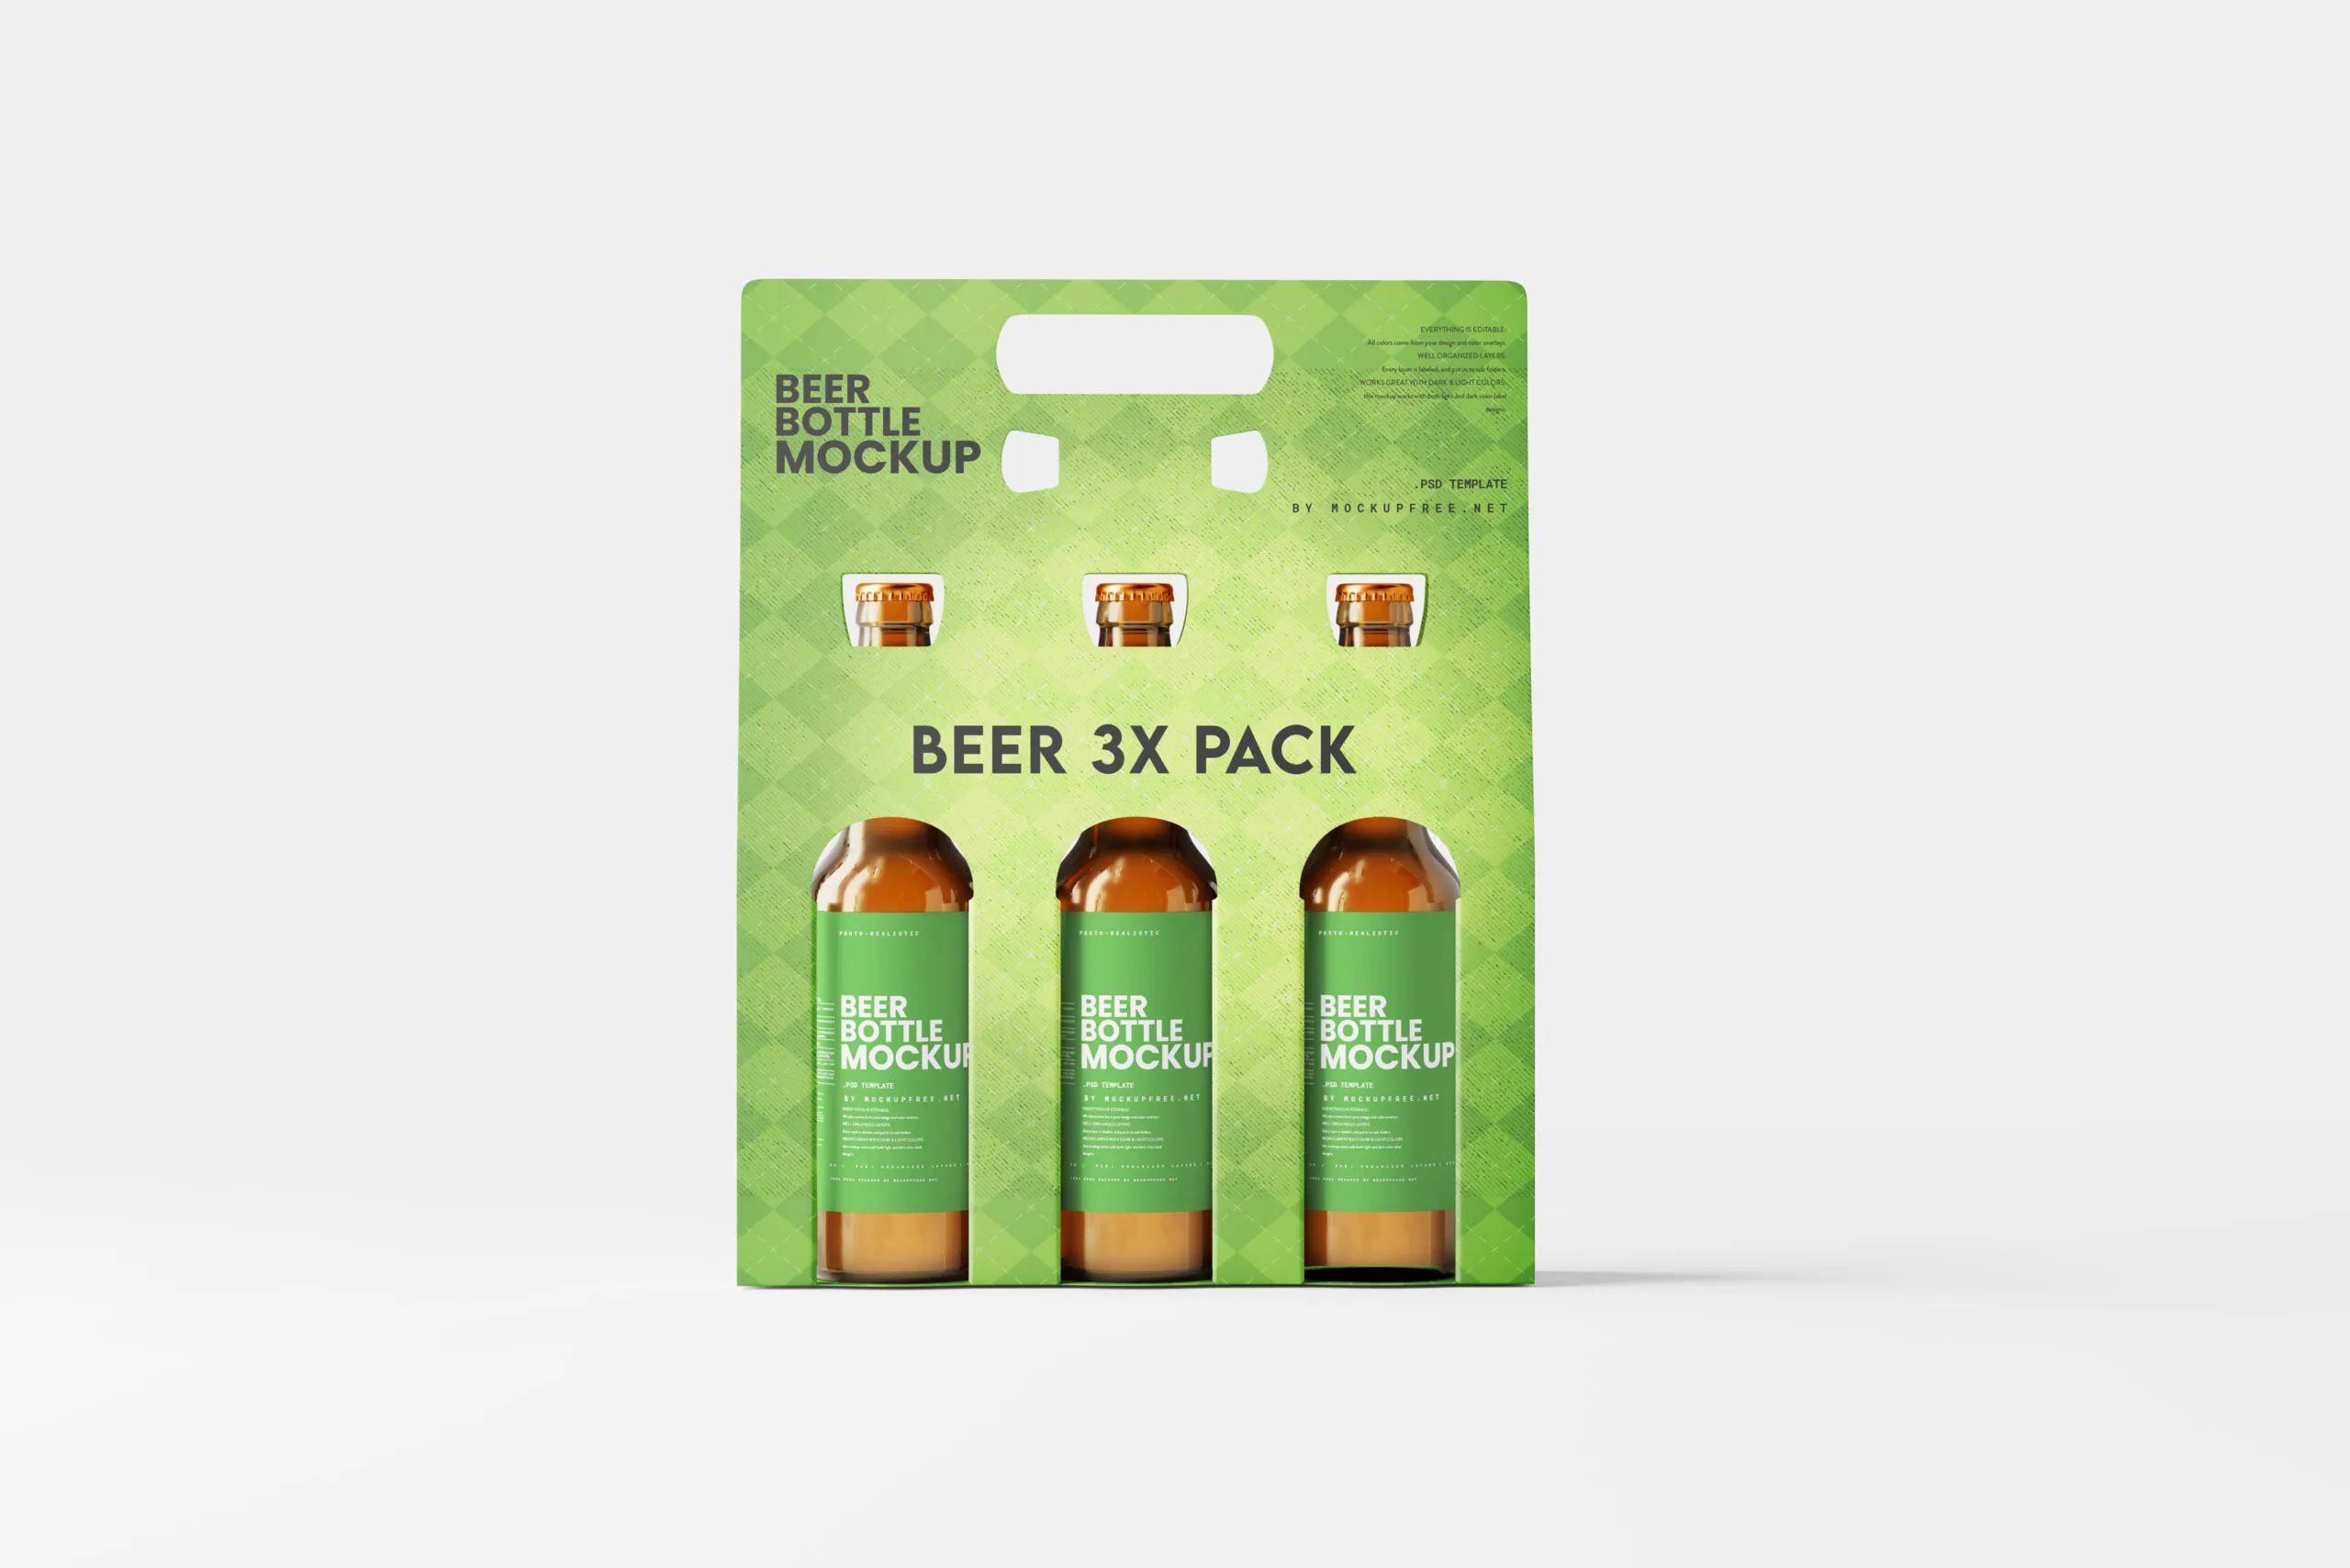 5 Mockups of Three Pack Beer Bottle Carrier in Varied Sights FREE PSD